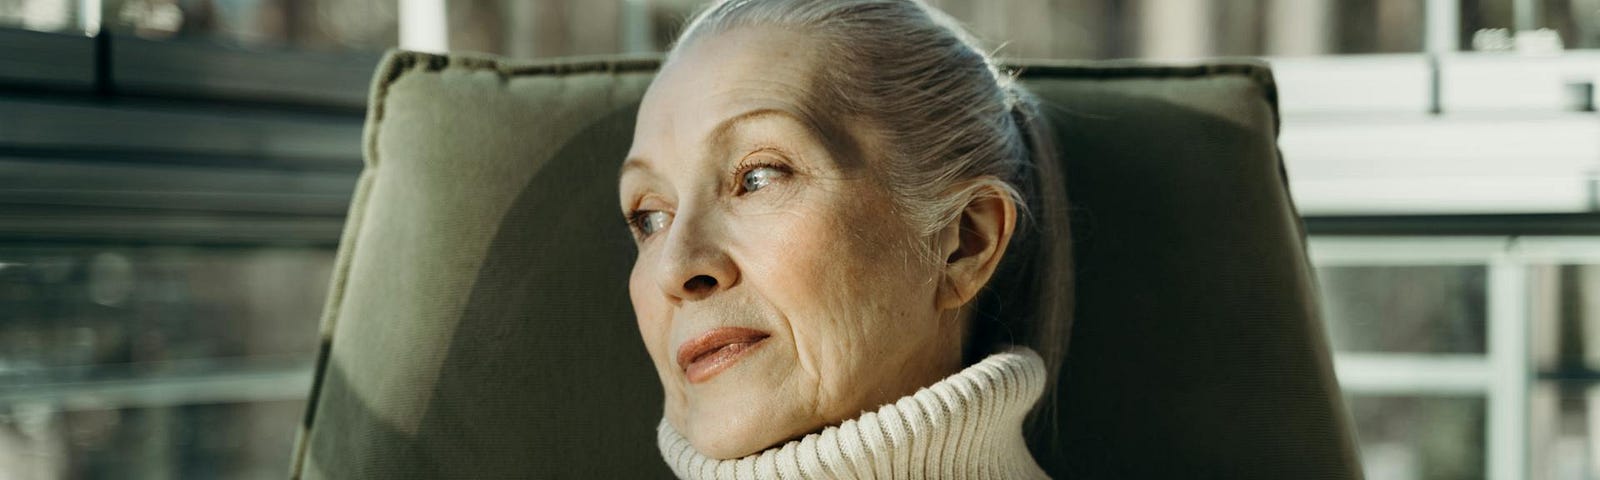 An older woman with grey hair pulled back in a ponytail wears a beige turtleneck sweater and glances sideways while sitting in an olive green chair.